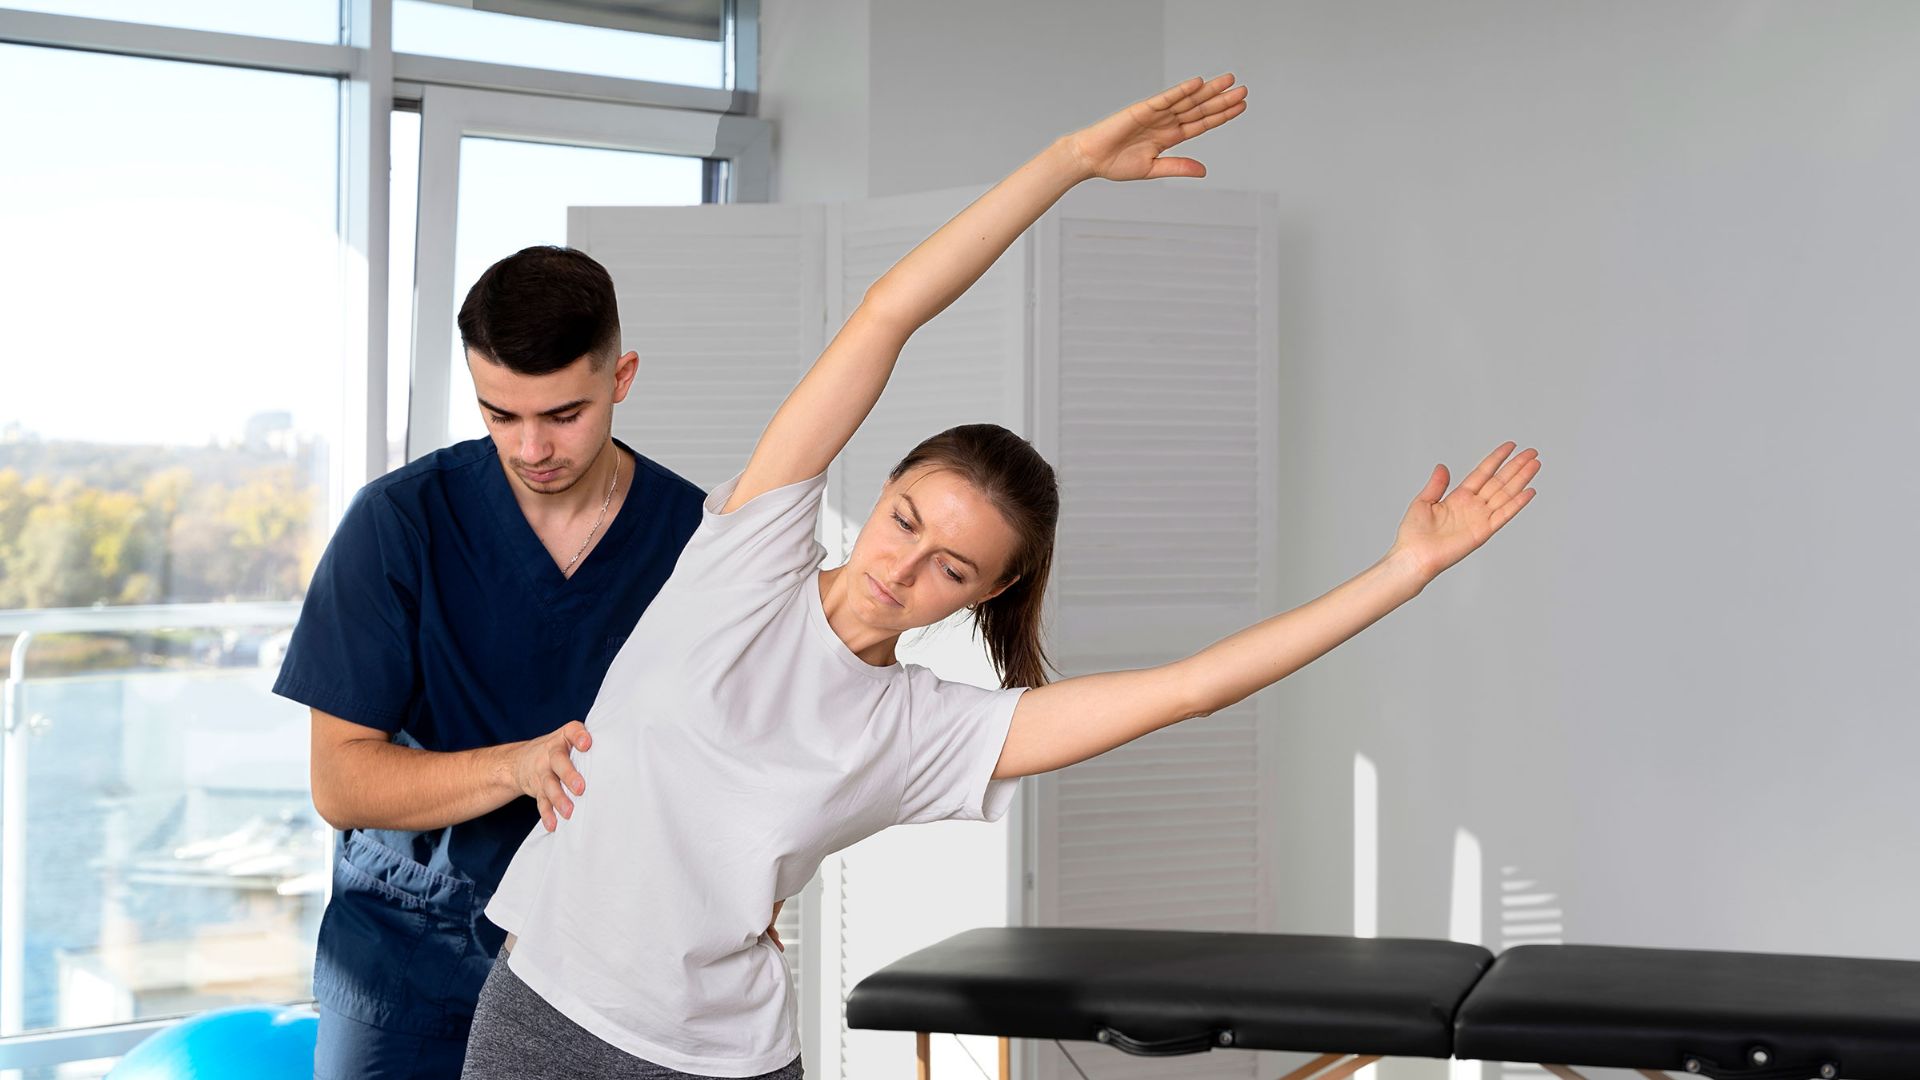 What A Levels Are Needed for Physiotherapy? Choose These Subjects and Excel